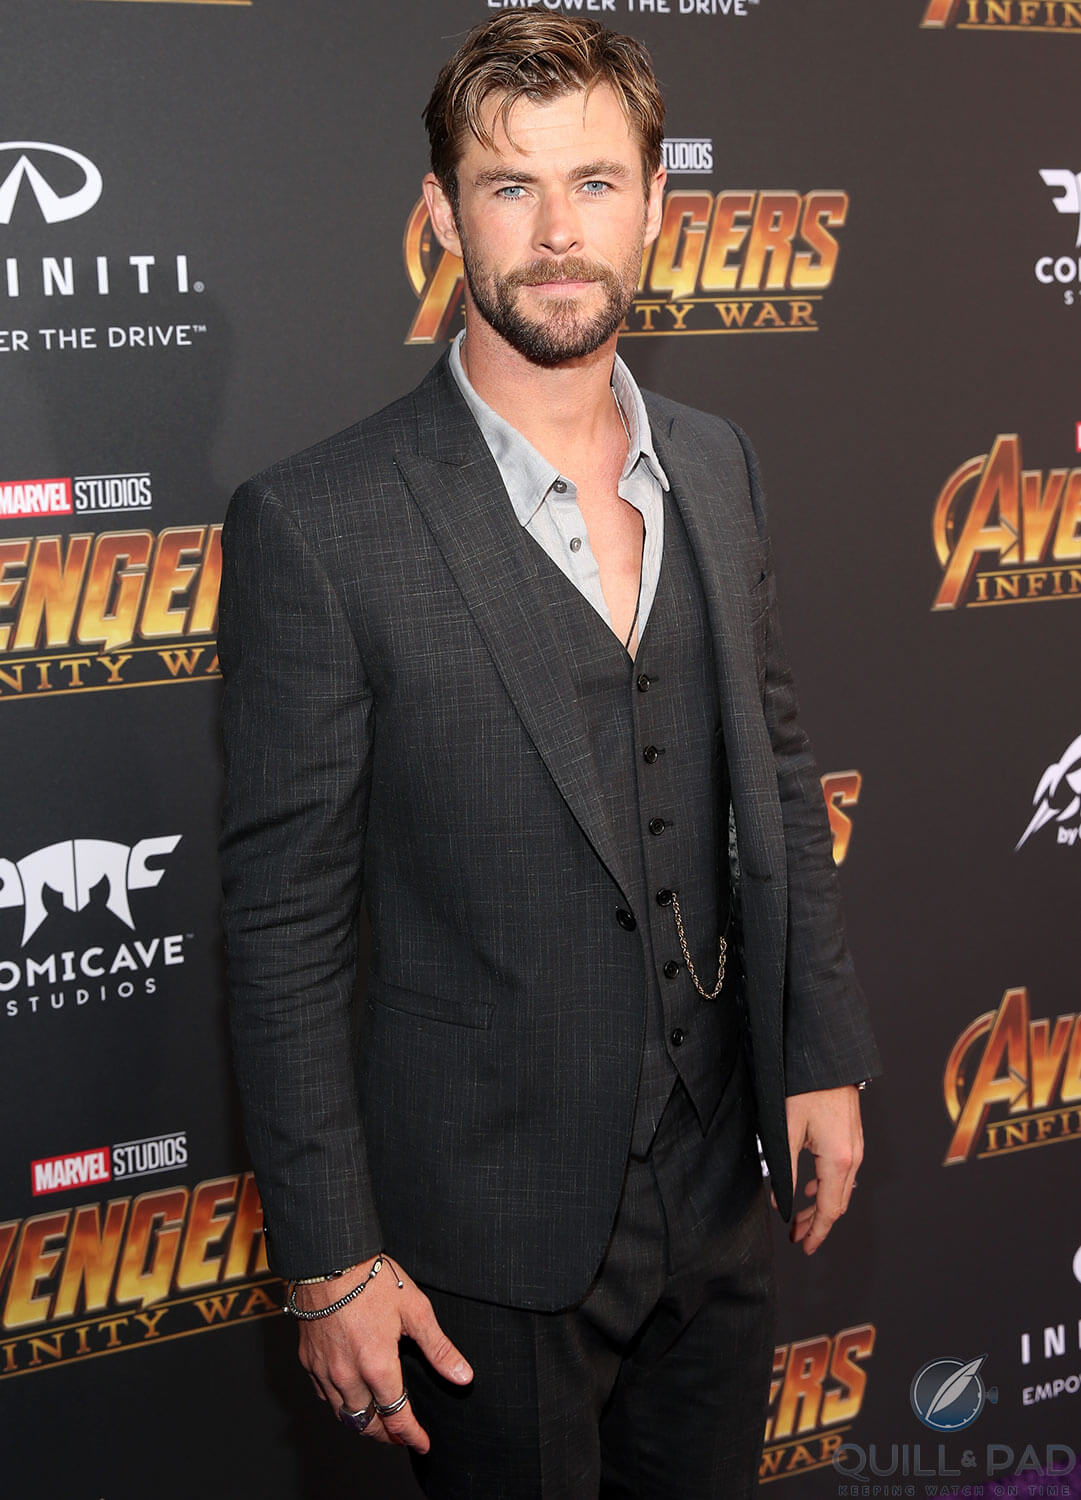 Chris Hemsworth at the ‘Avengers: Infinity War’ world premier in Los Angeles: is that a pocket watch chain? (photo courtesy Citizen)